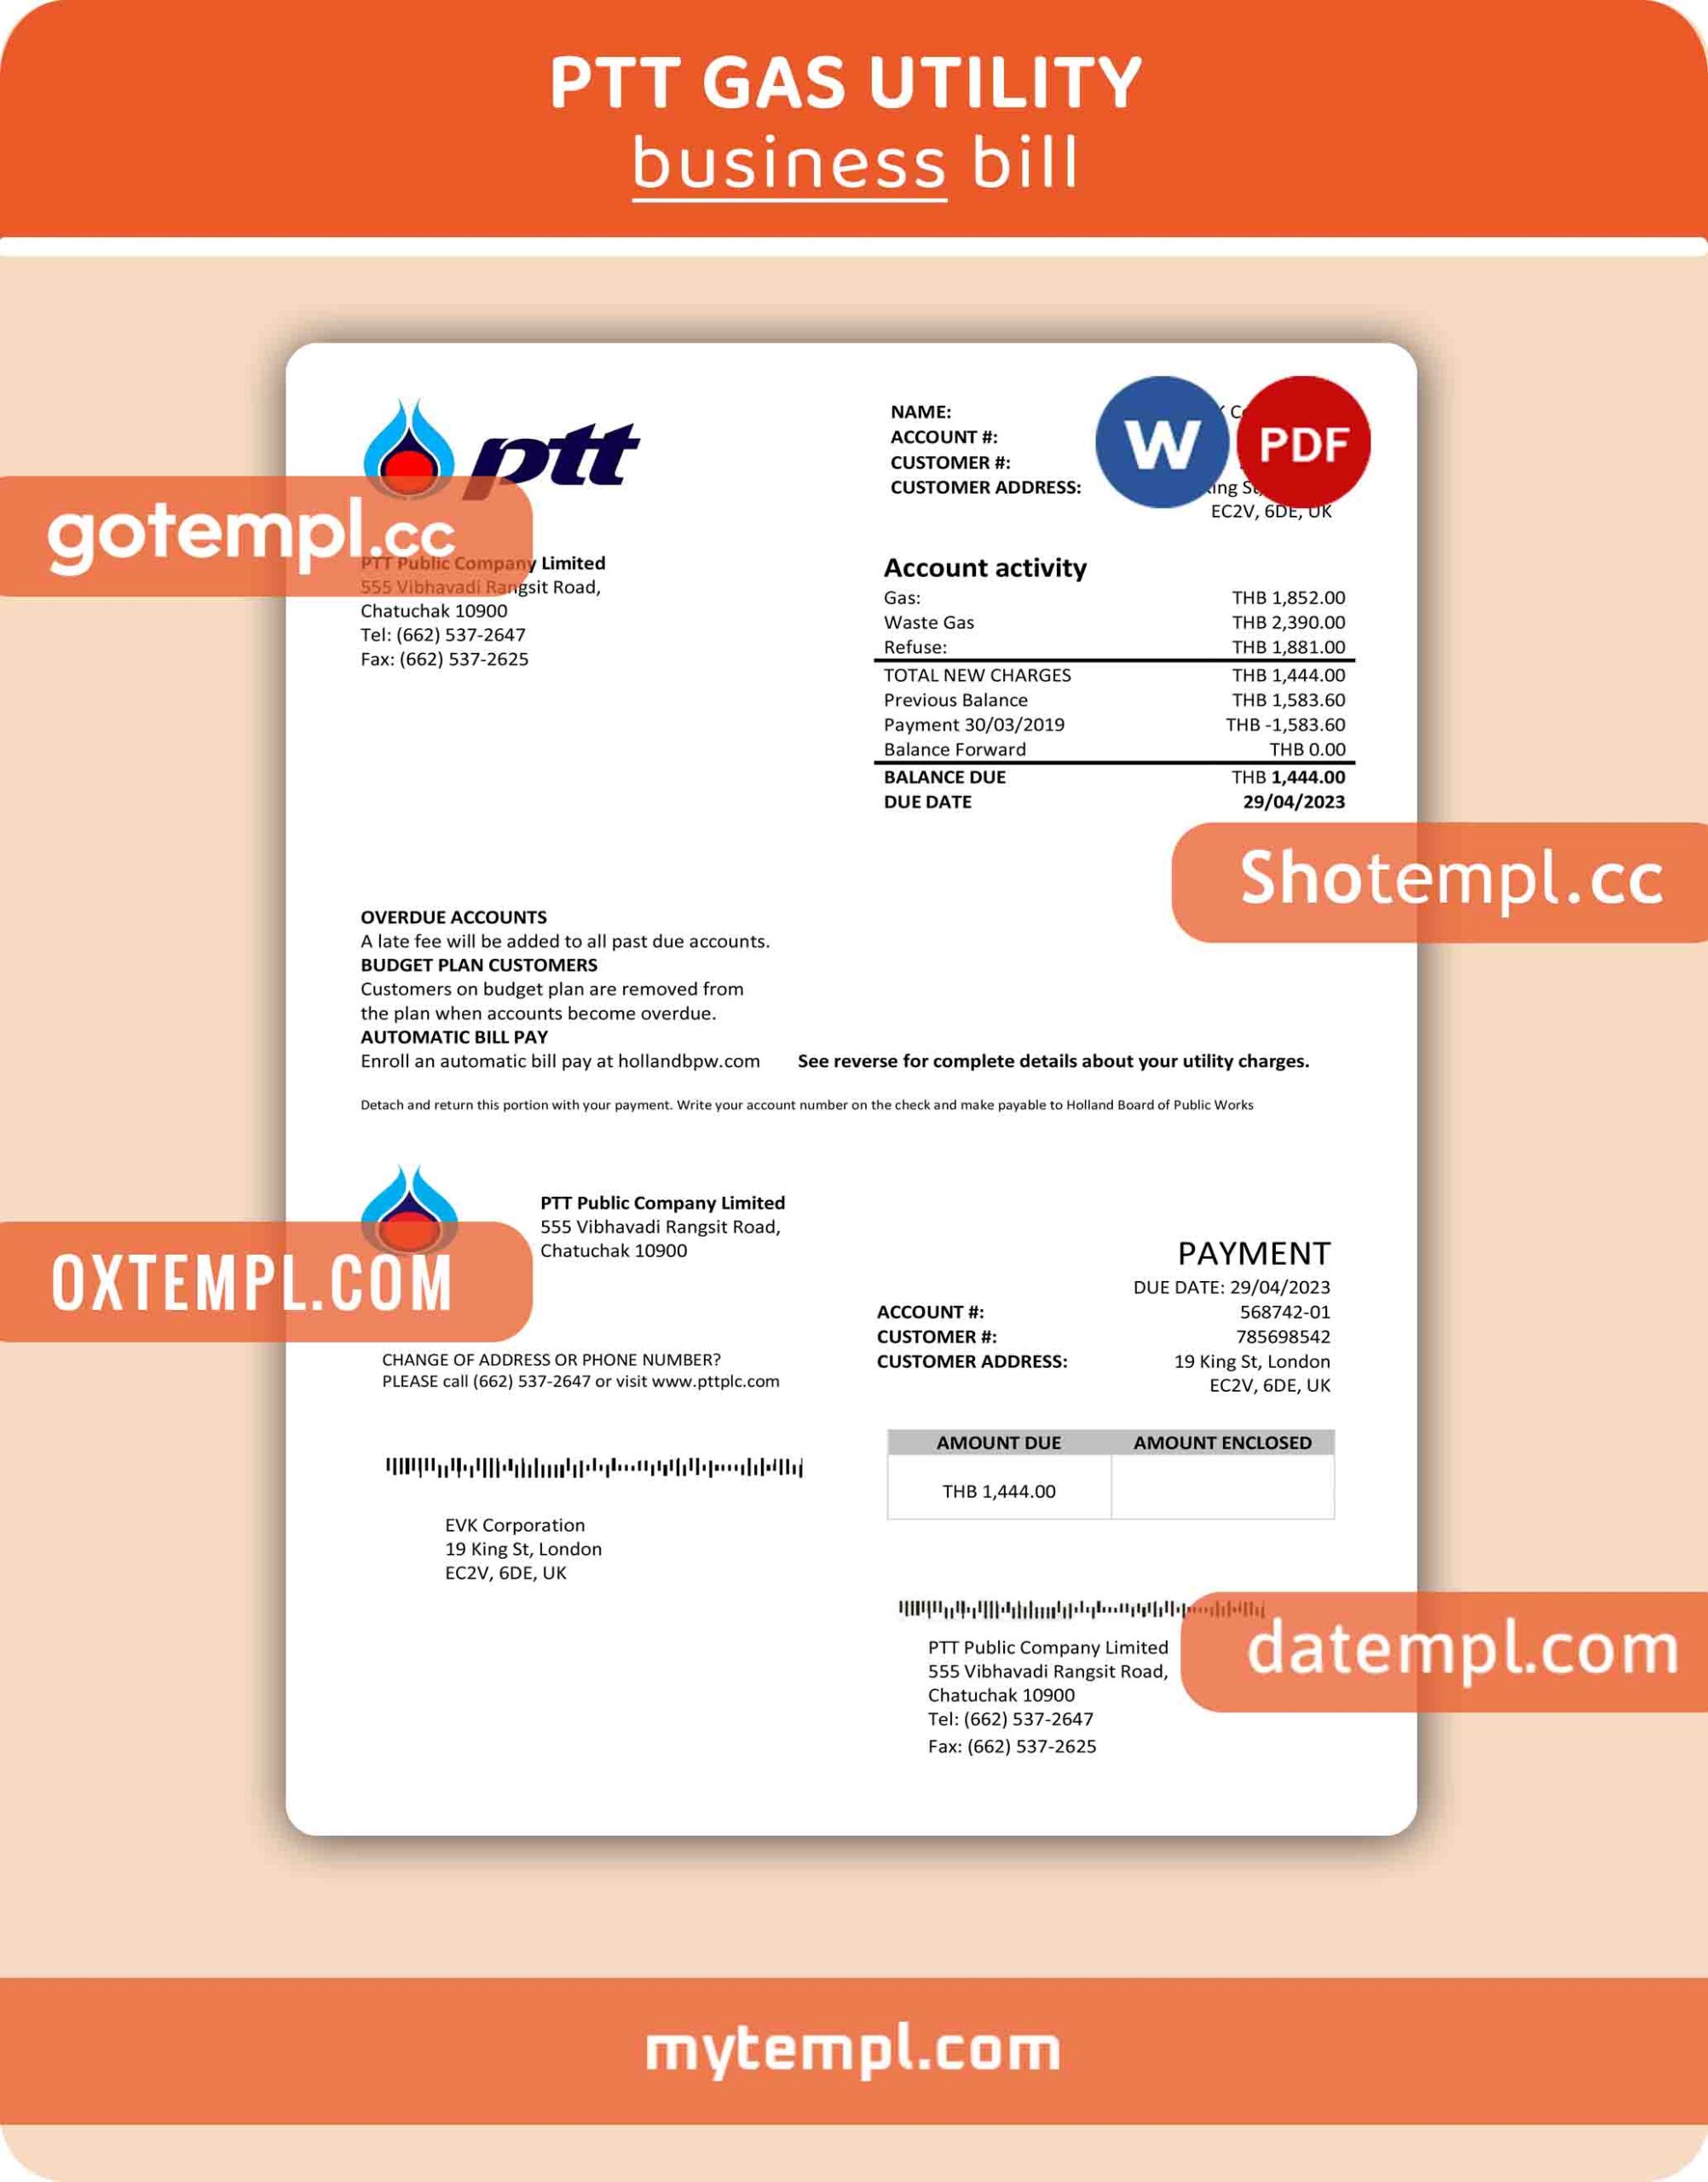 PTT gas business utility bill, Word and PDF template, 4 pages, version 3